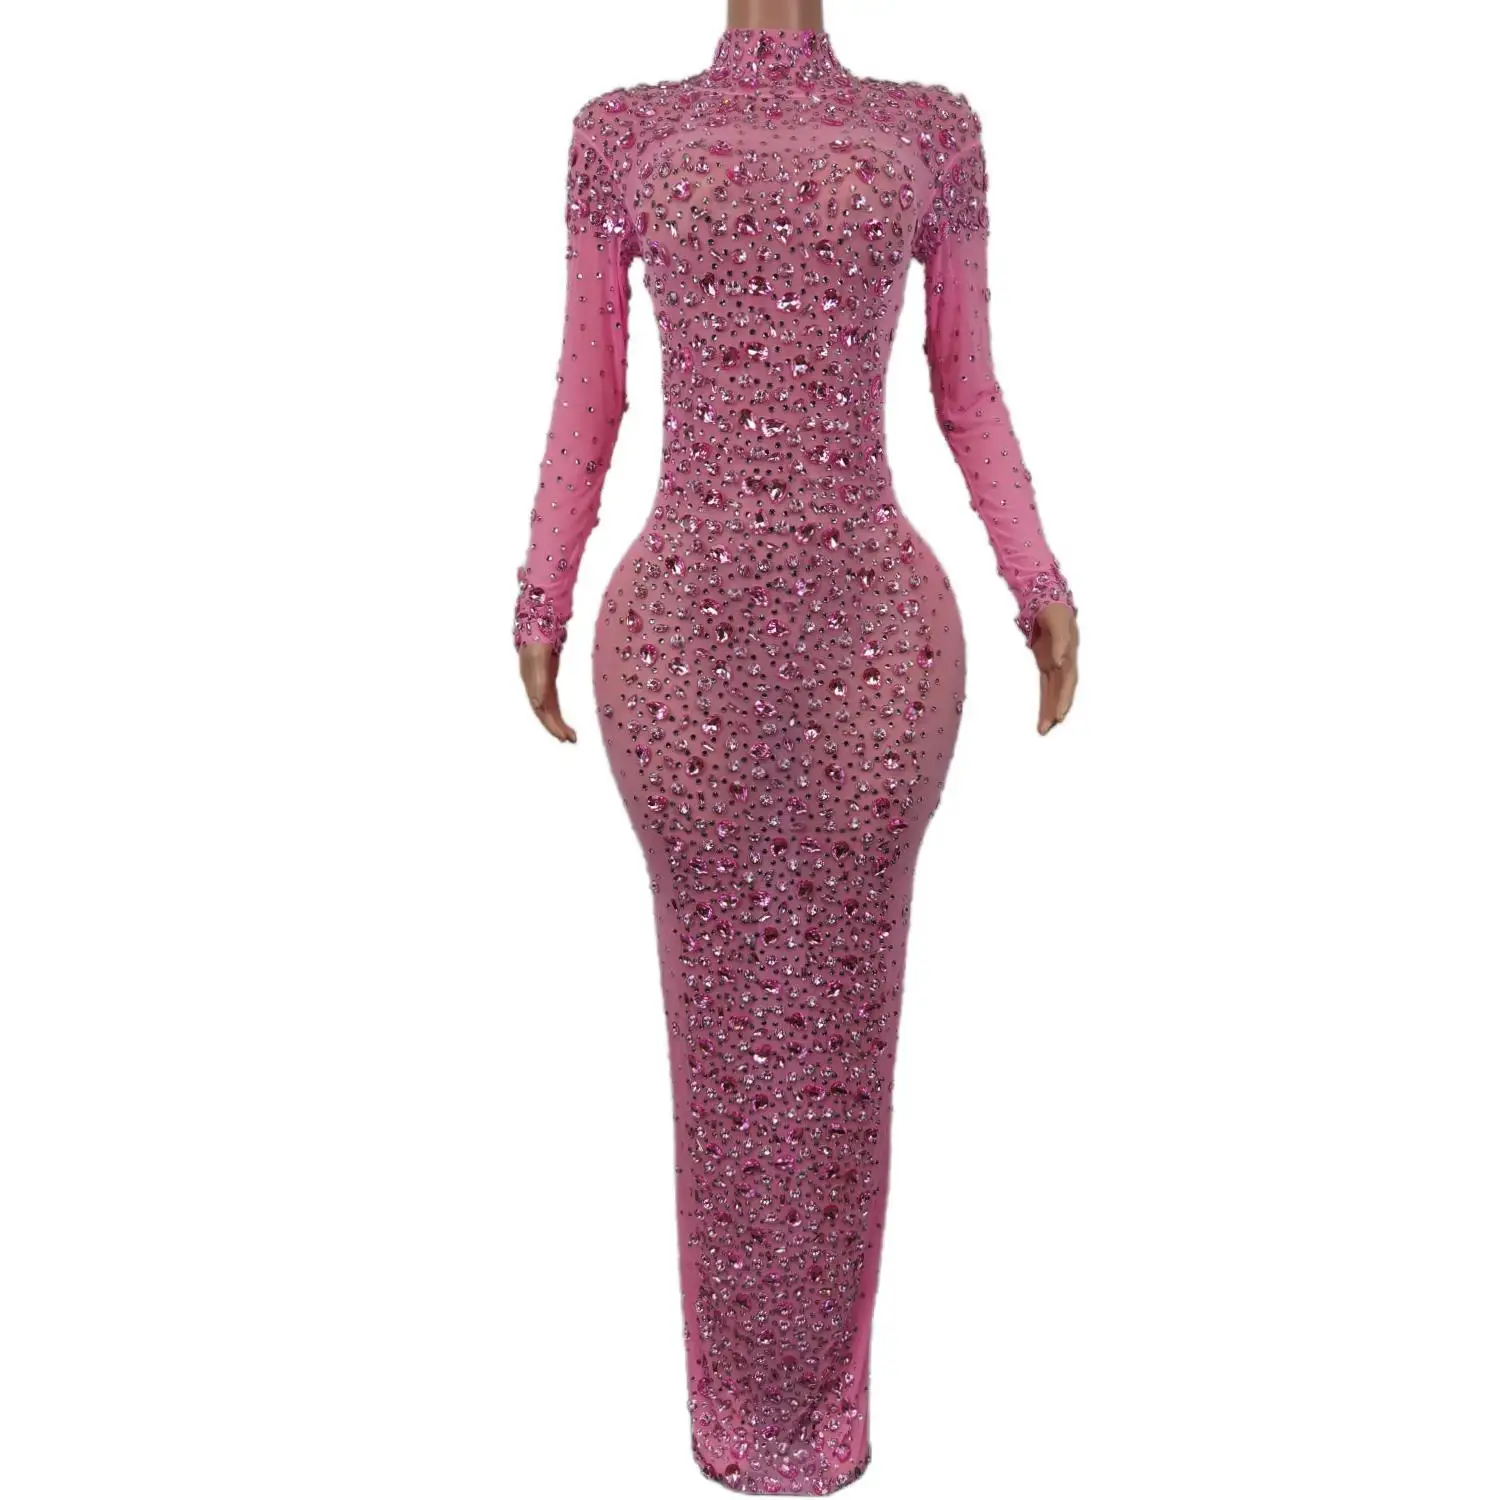 

Shiny Pink Rhinestones Dress Women Sexy Pole Dance Outfit Stage Show Party Performance Wear Jazz Singer Dancer Costumes Cuixing